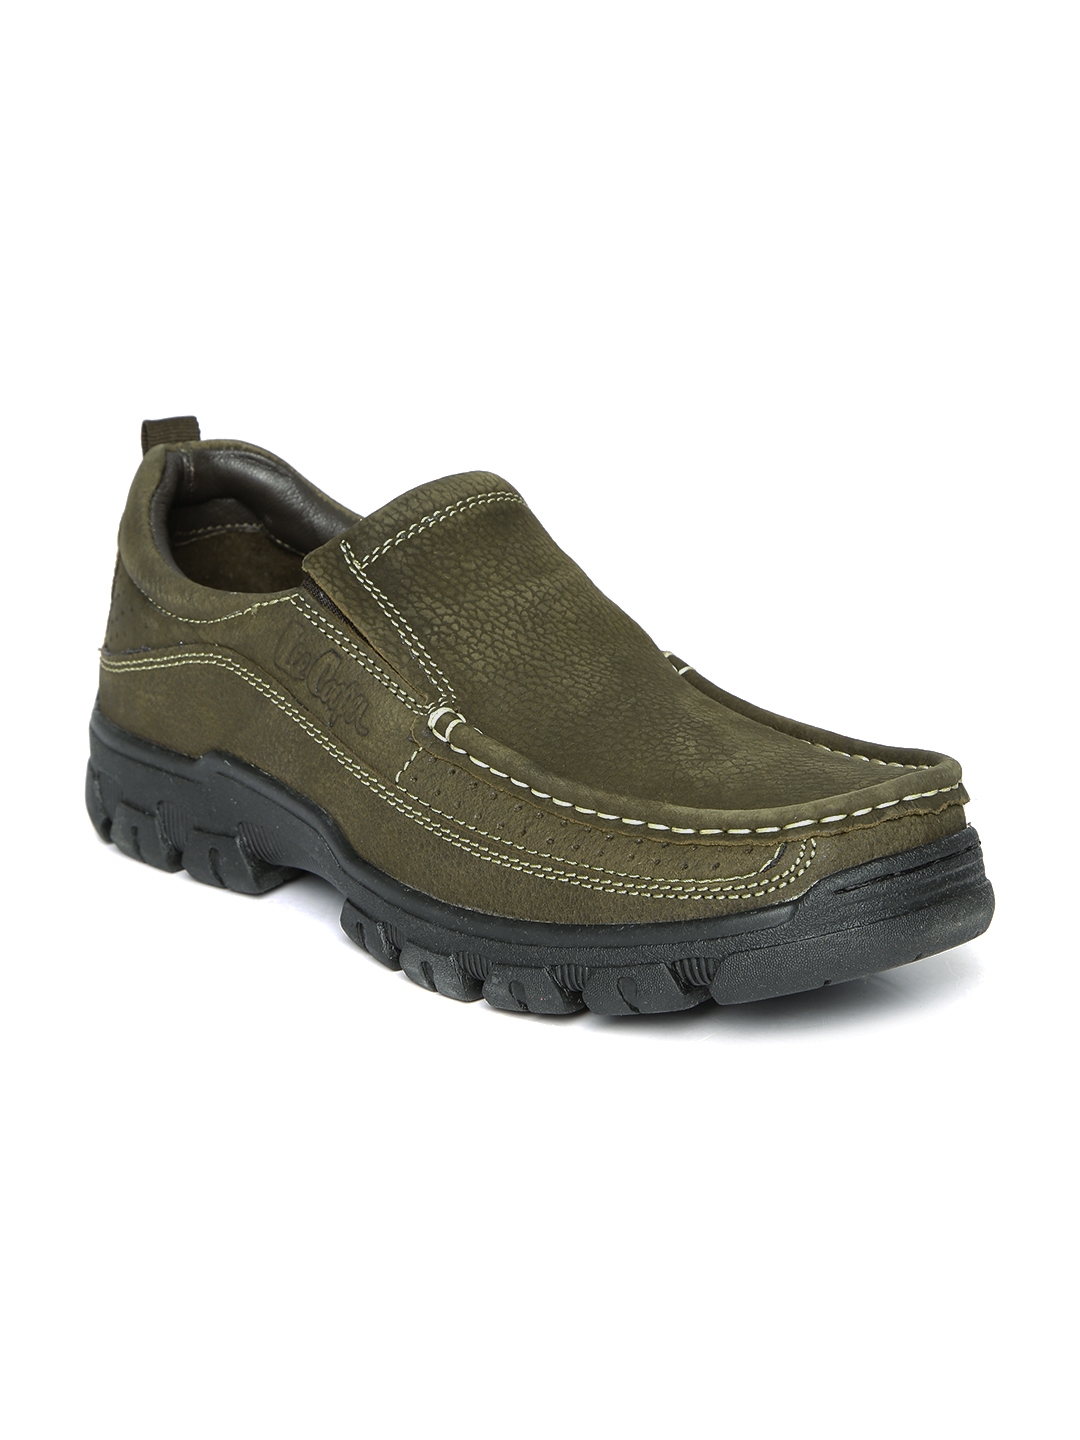 lee green casual shoes